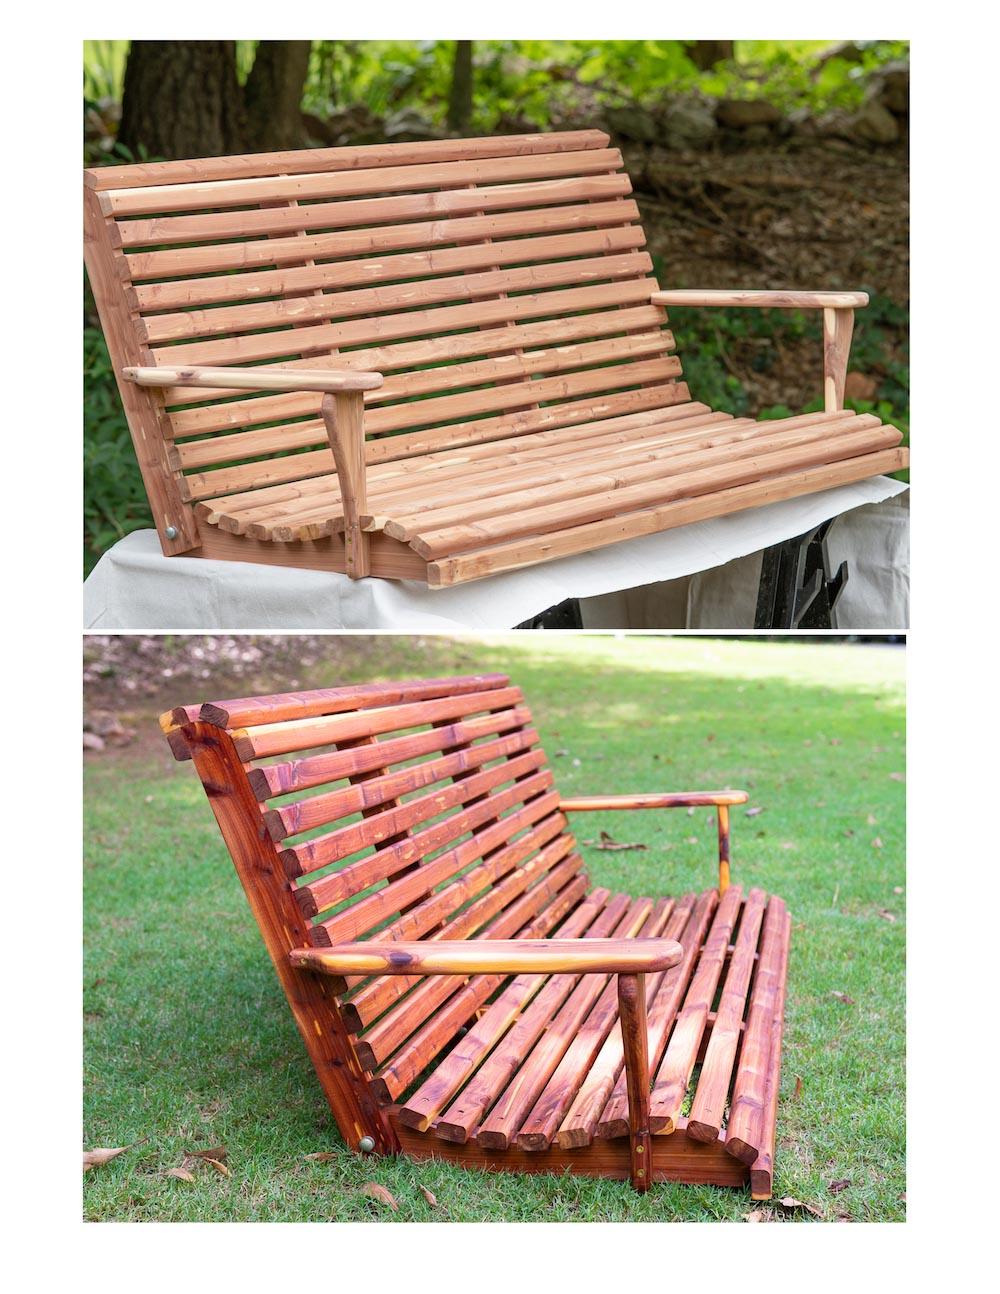 The before and after of a weatherproofed cedar exterior swing.